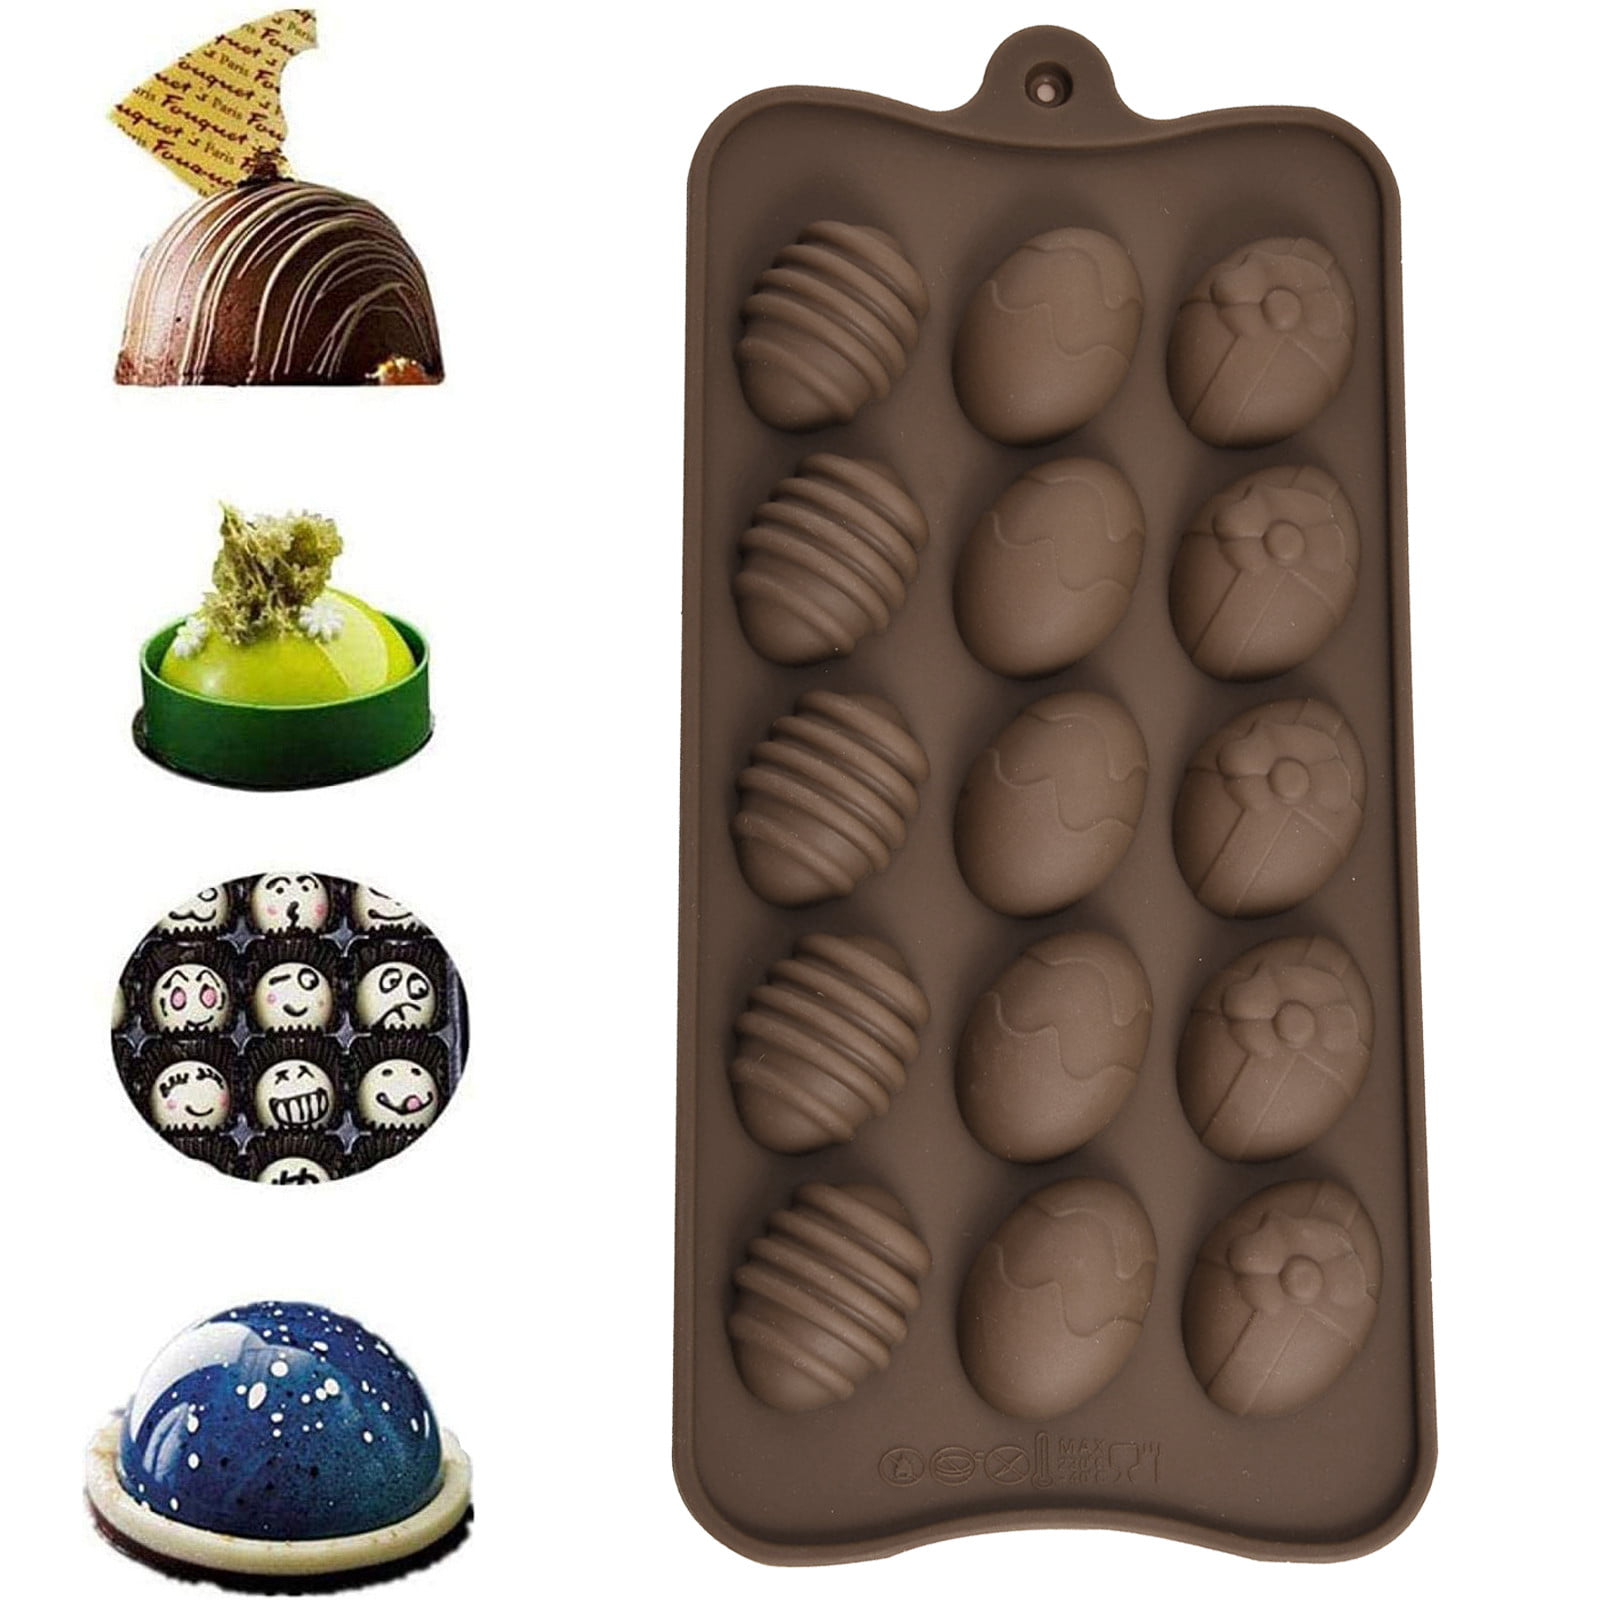 Silicone Chocolate Cake Candy Cookies Baking Mould Pan Tools Cupcake Mold Muffin 